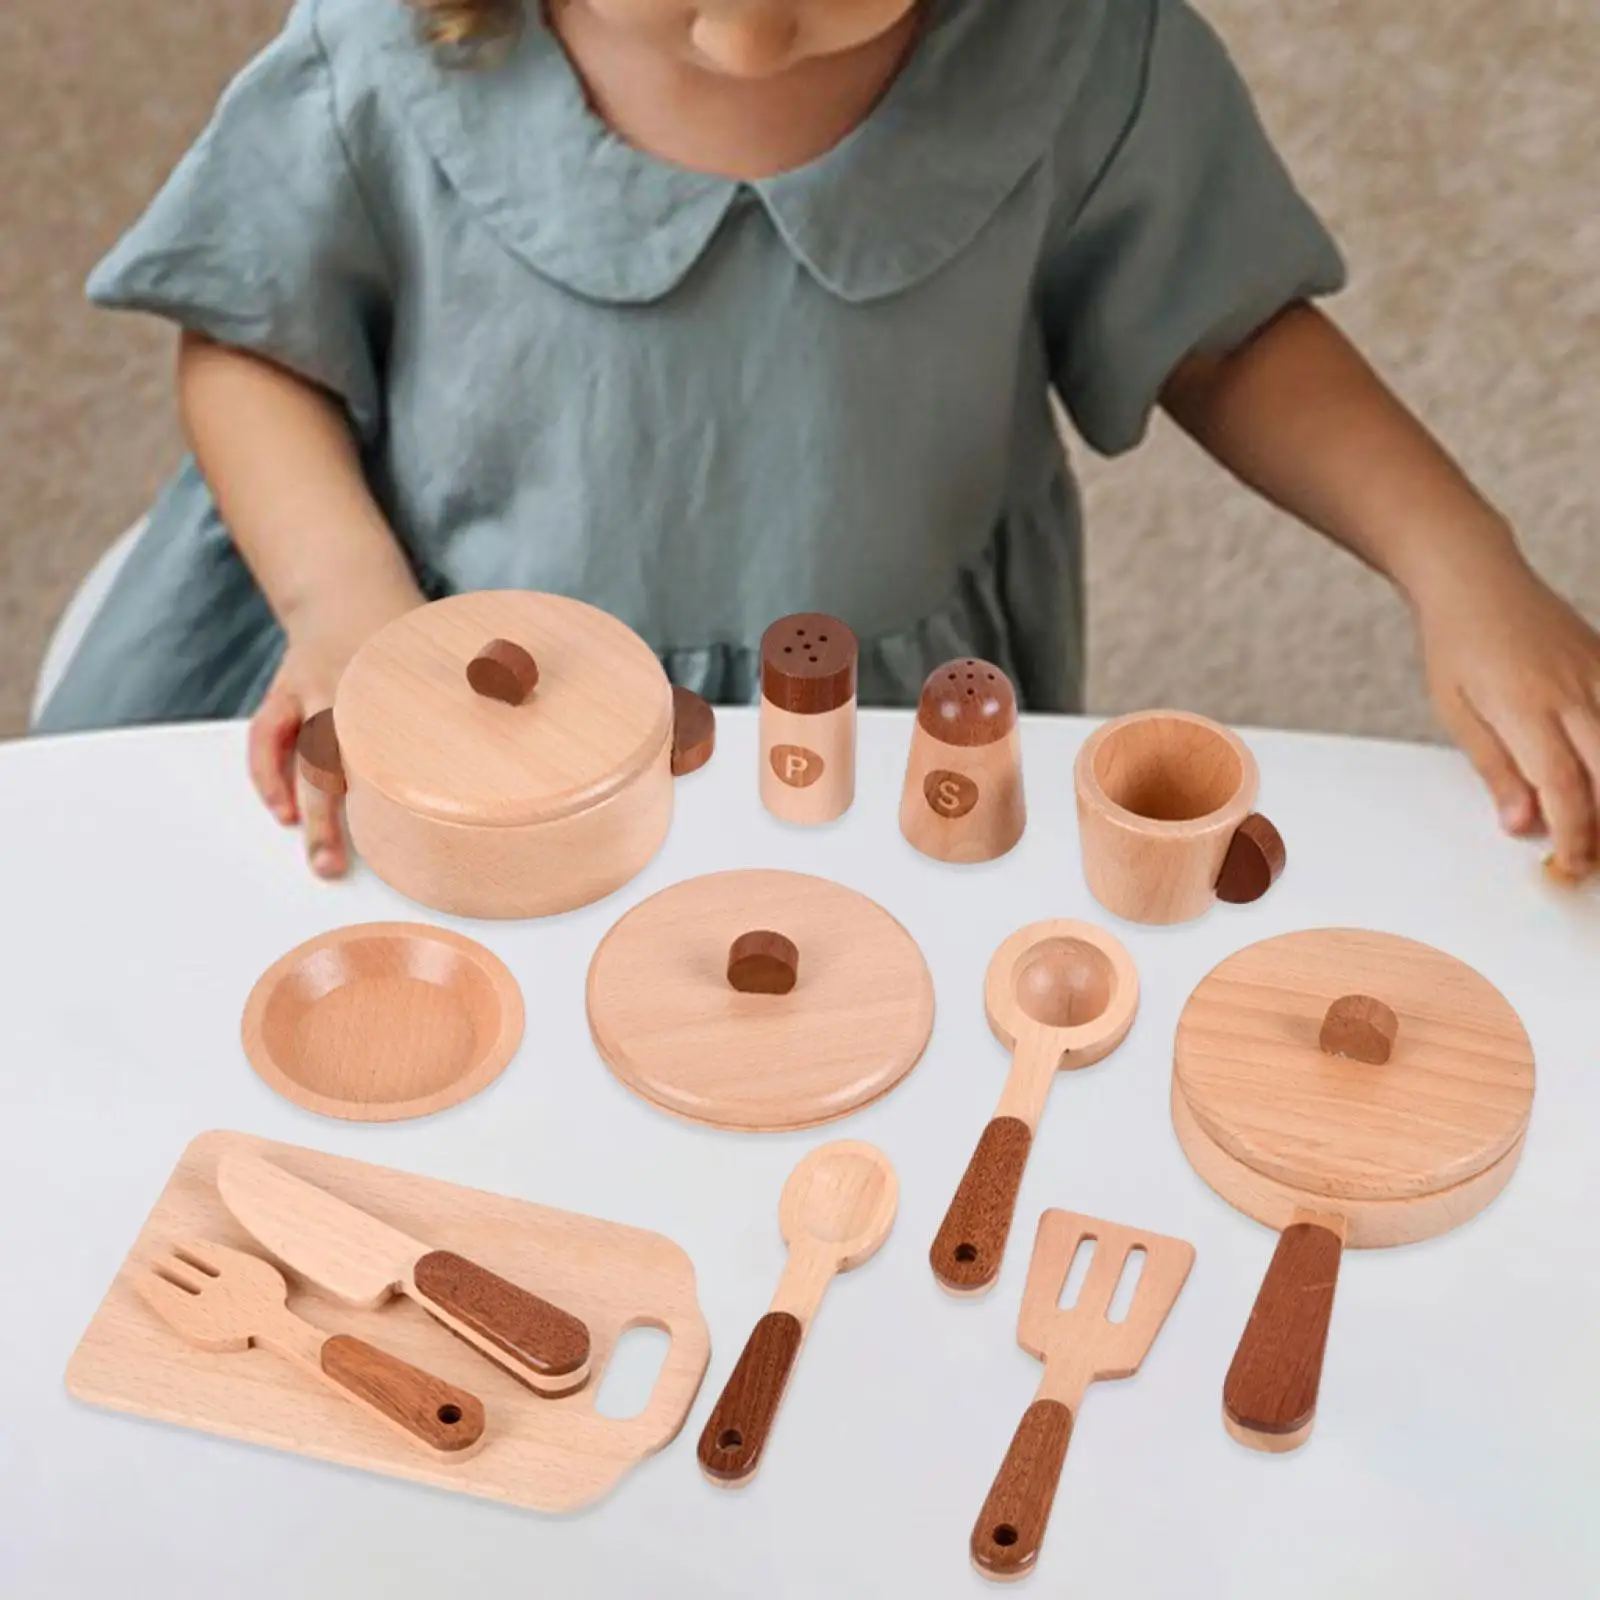 

Pretend Play Toy Role Play Toys Wooden Play Cooking Set Simulation Cooking Kitchen Playset for Girls Boys Birthday Gift Ages 3+